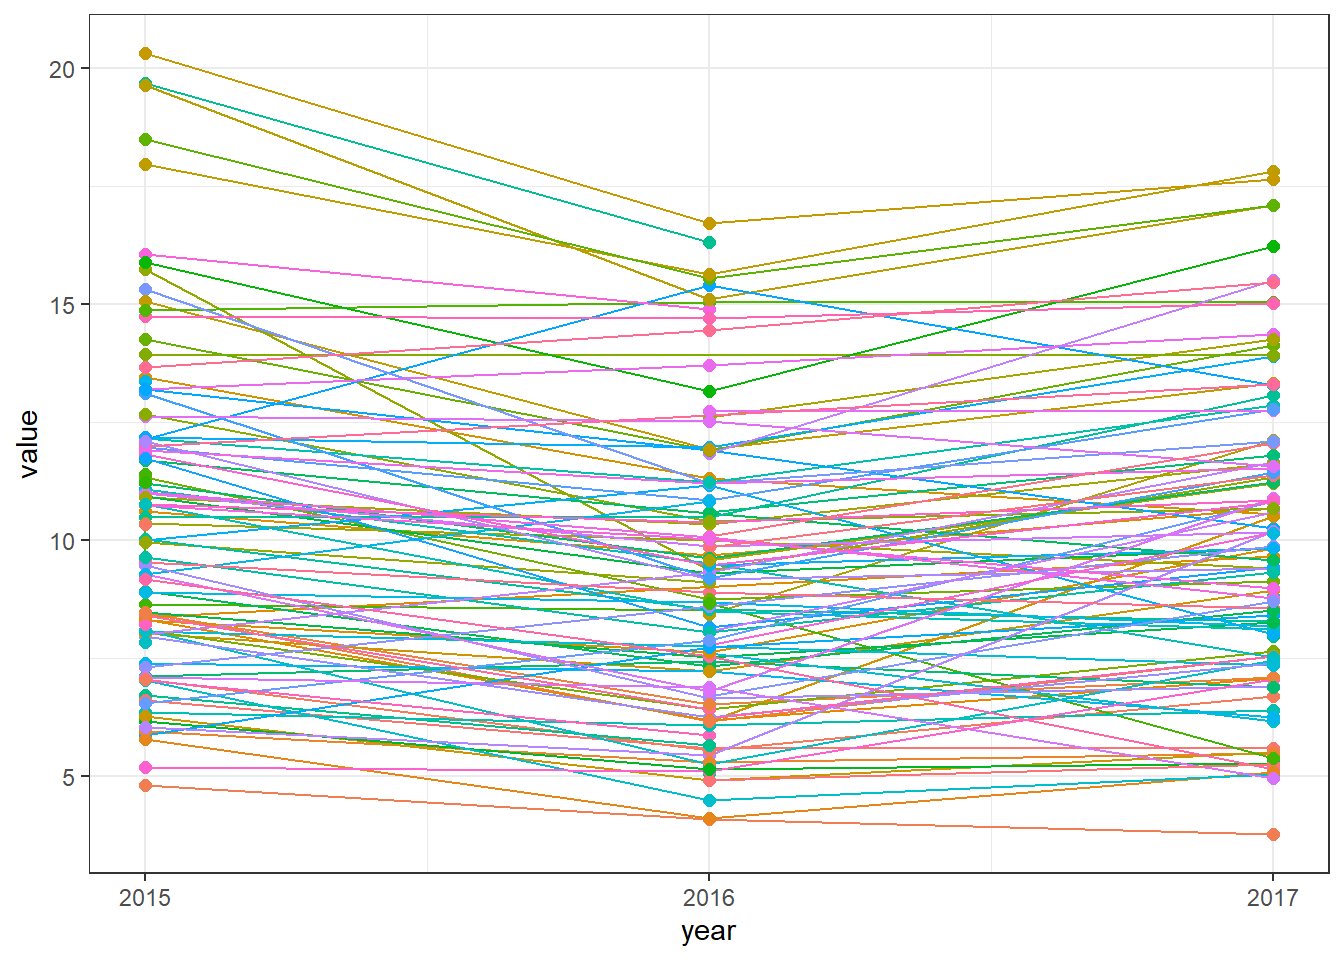 Time plot of PM$_{2.5}$ values for each of the monitoring stations.